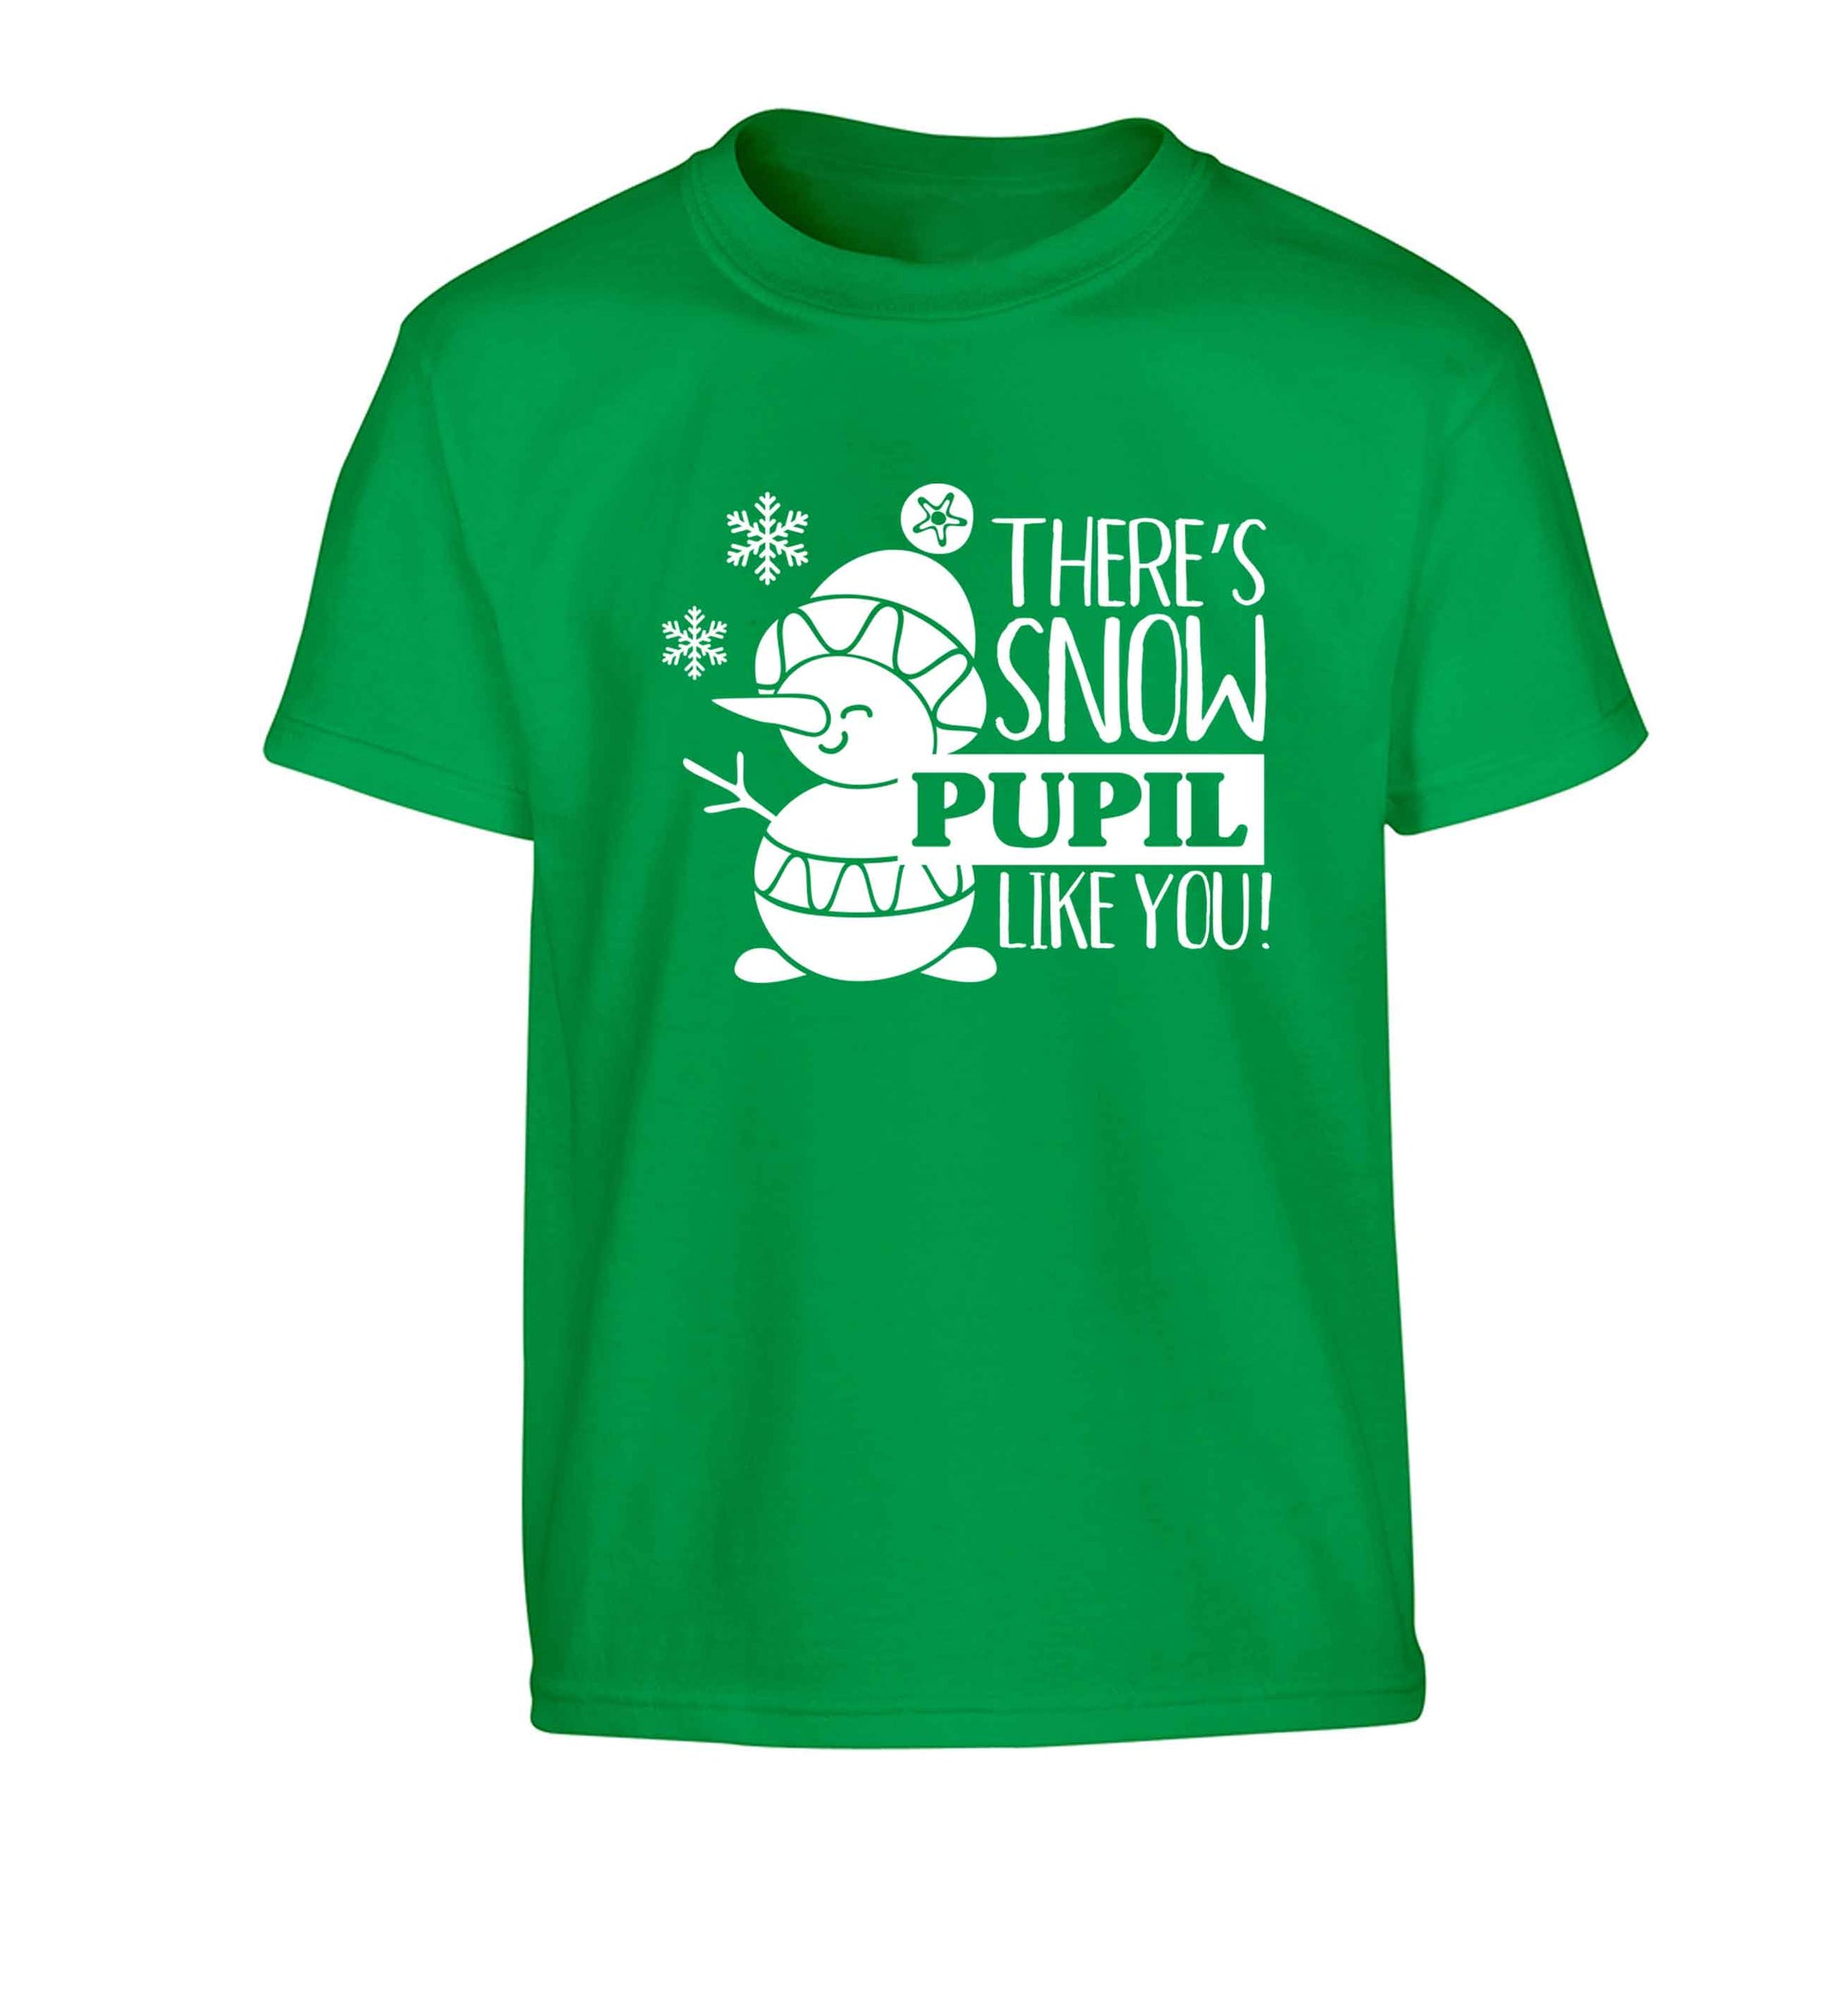 There's snow pupil like you Children's green Tshirt 12-13 Years